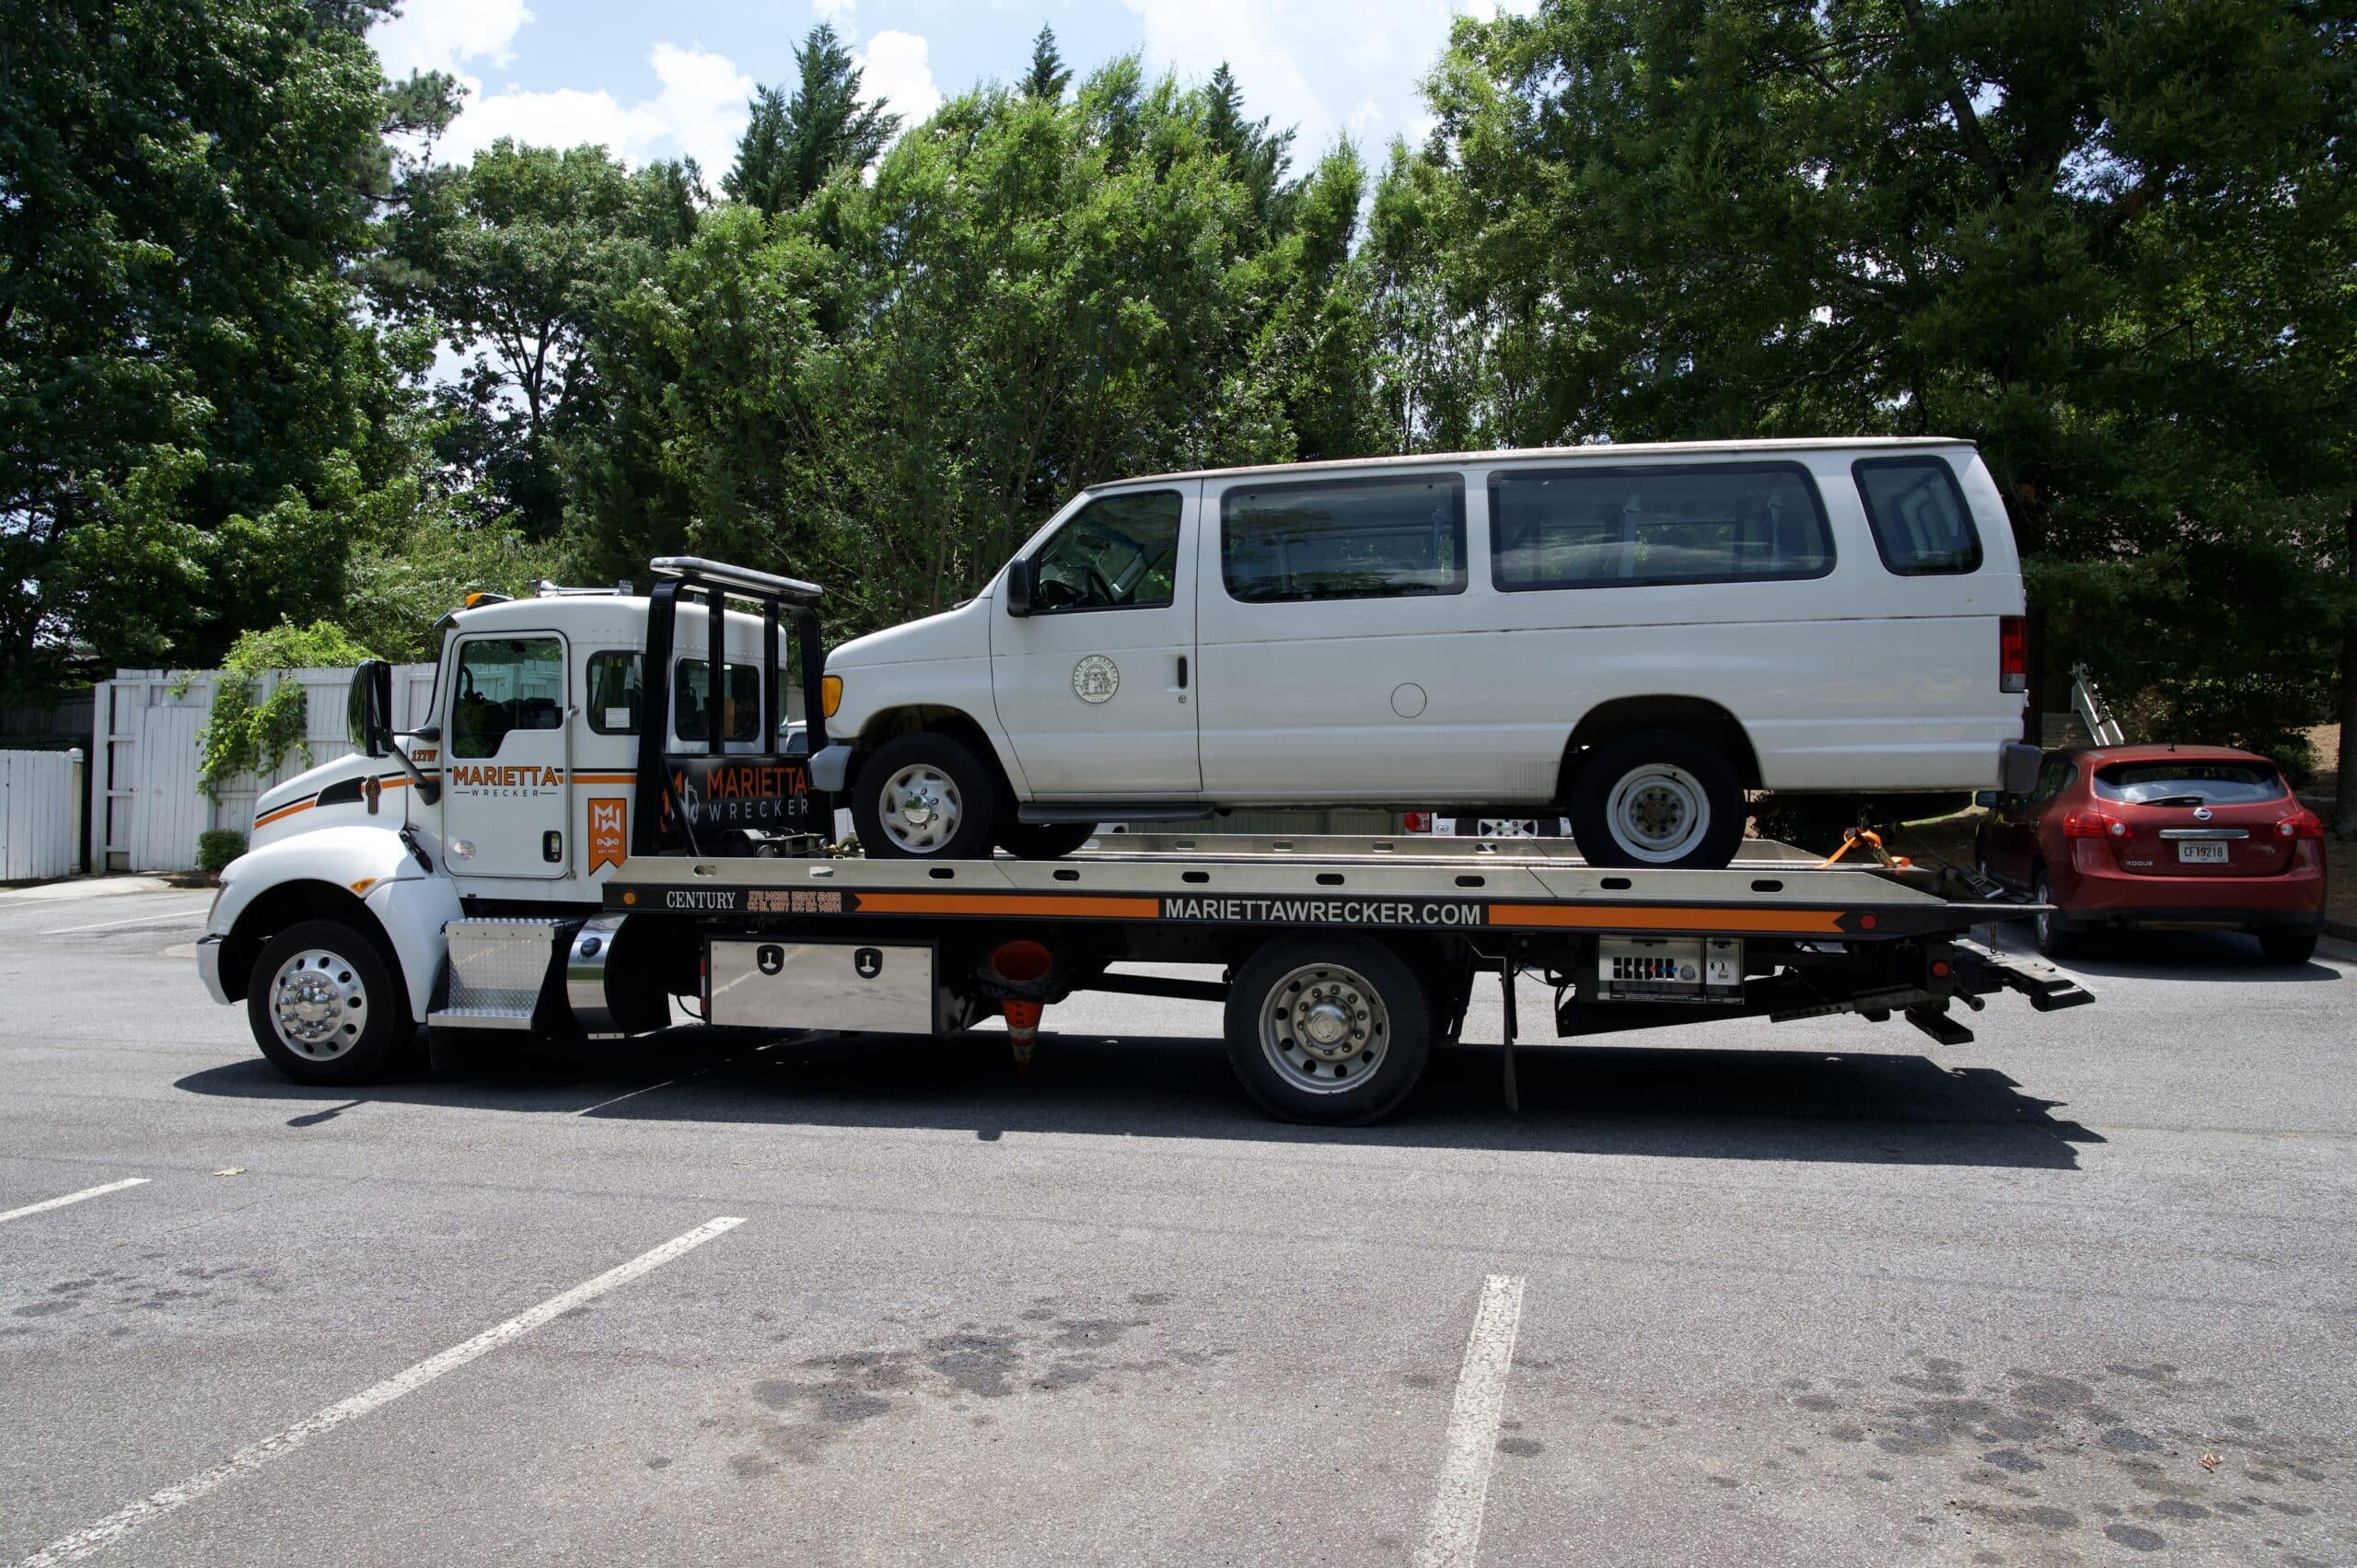 Towing Company Melbourne Fl